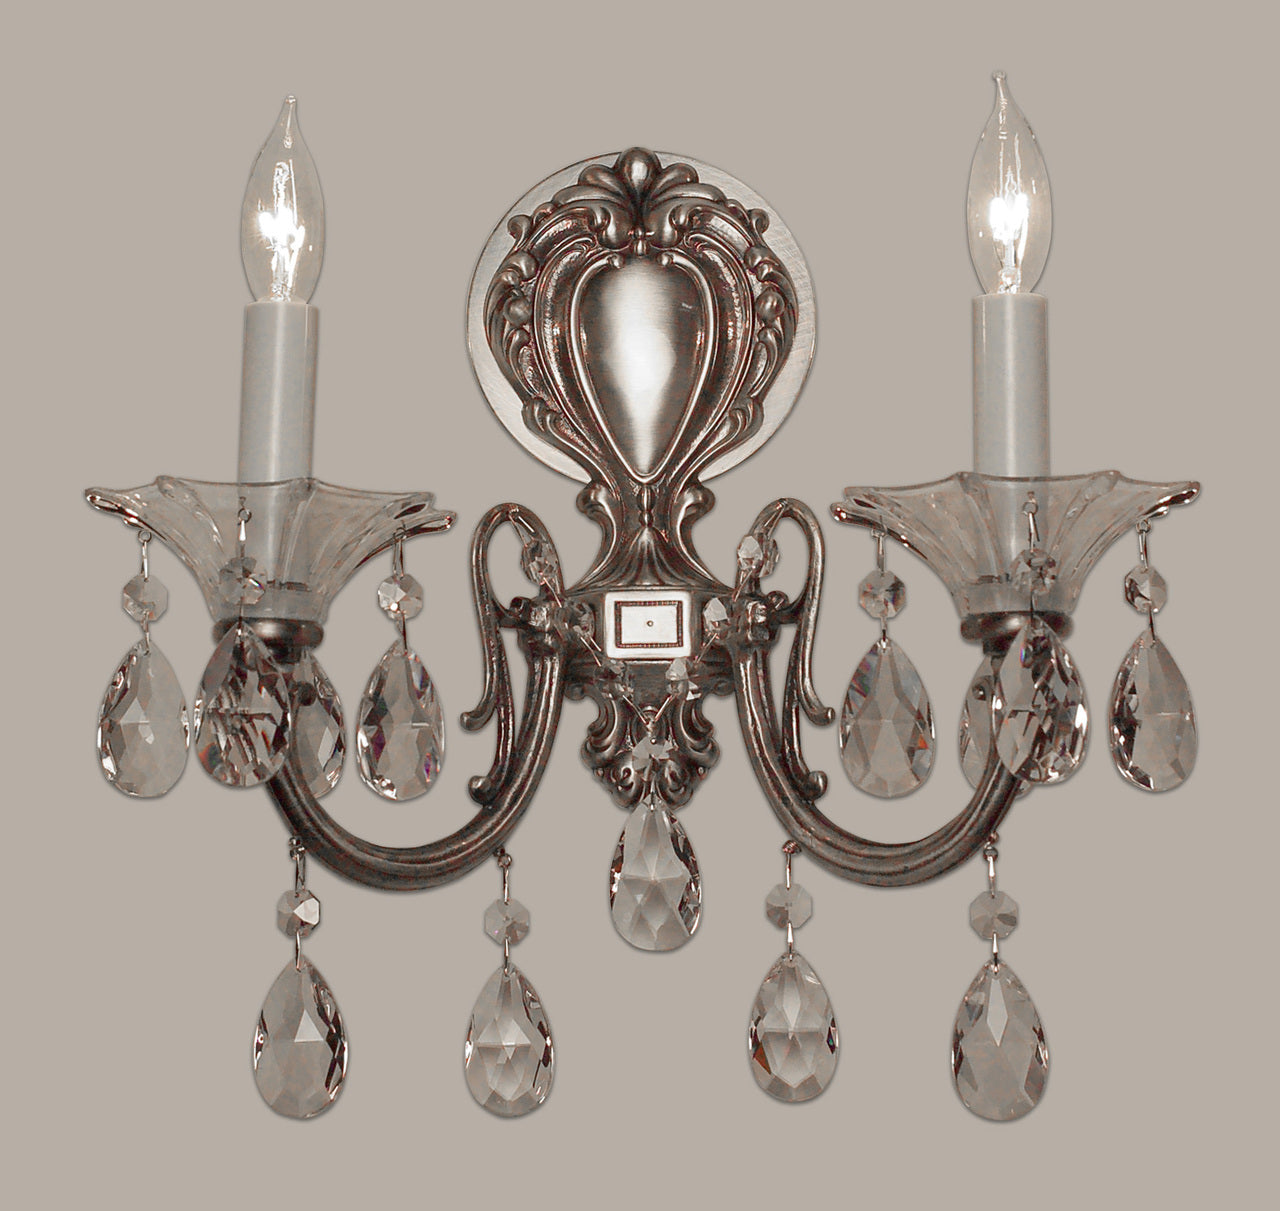 Classic Lighting 57052 RB S Via Lombardi Crystal Wall Sconce in Roman Bronze (Imported from Spain)